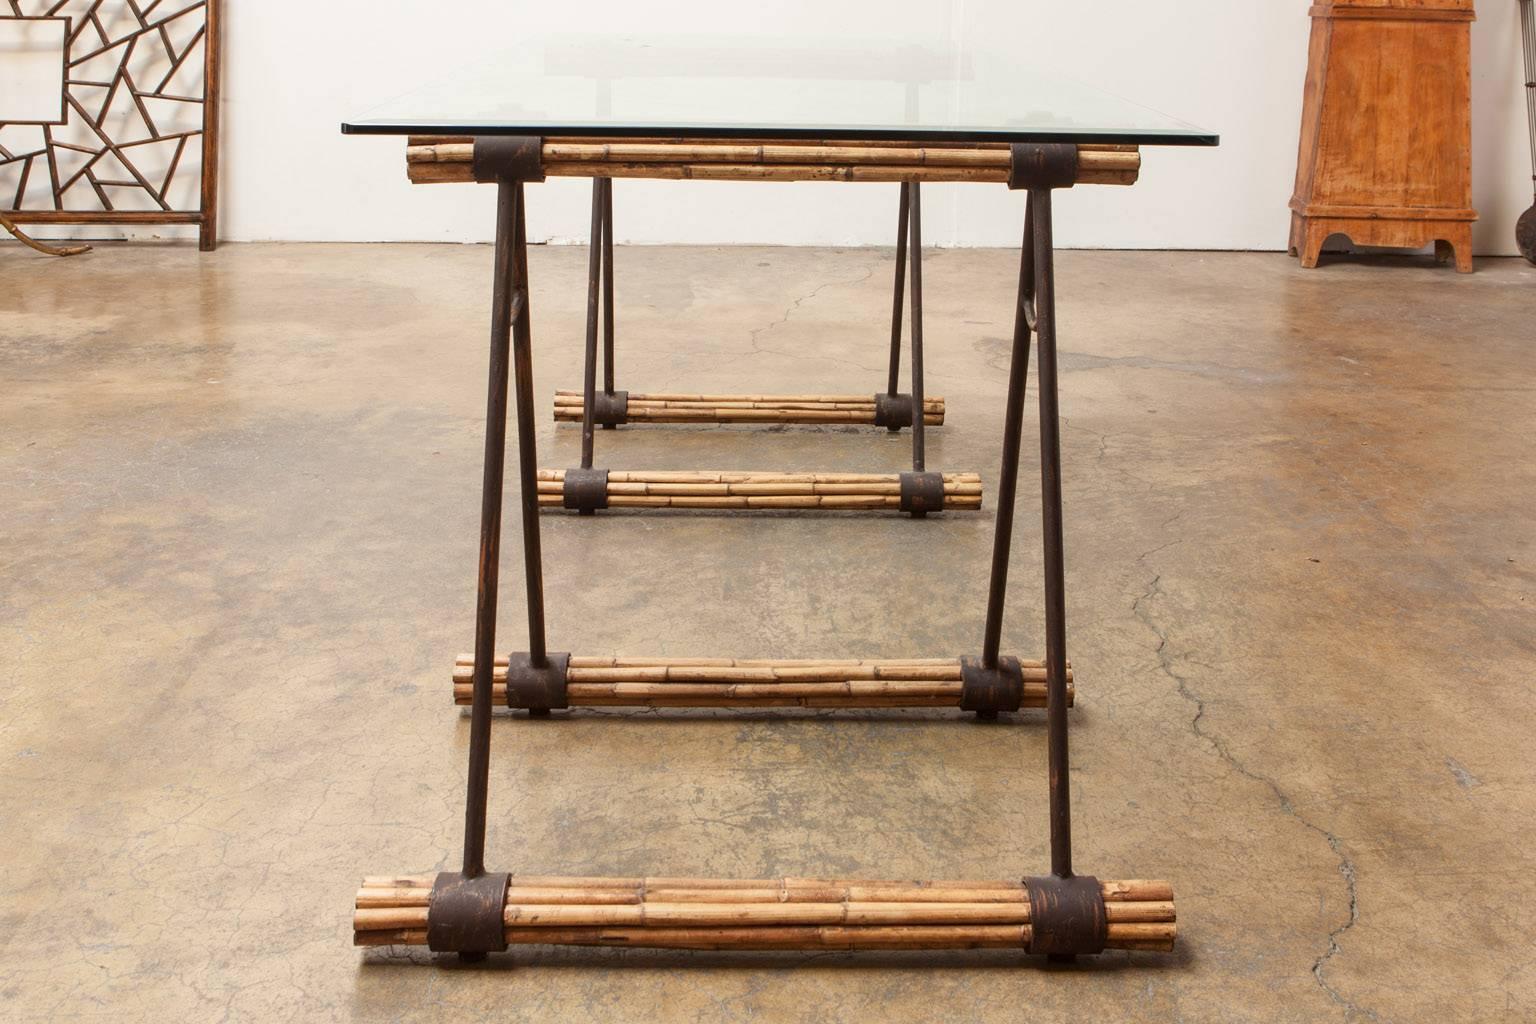 Stylish glass top desk featuring bamboo and iron supports made in the shape of saw horses. The Industrial style is softened with the use of bamboo reeds that also heighten the architectural look of this desk. Topped with a thick pane of beveled